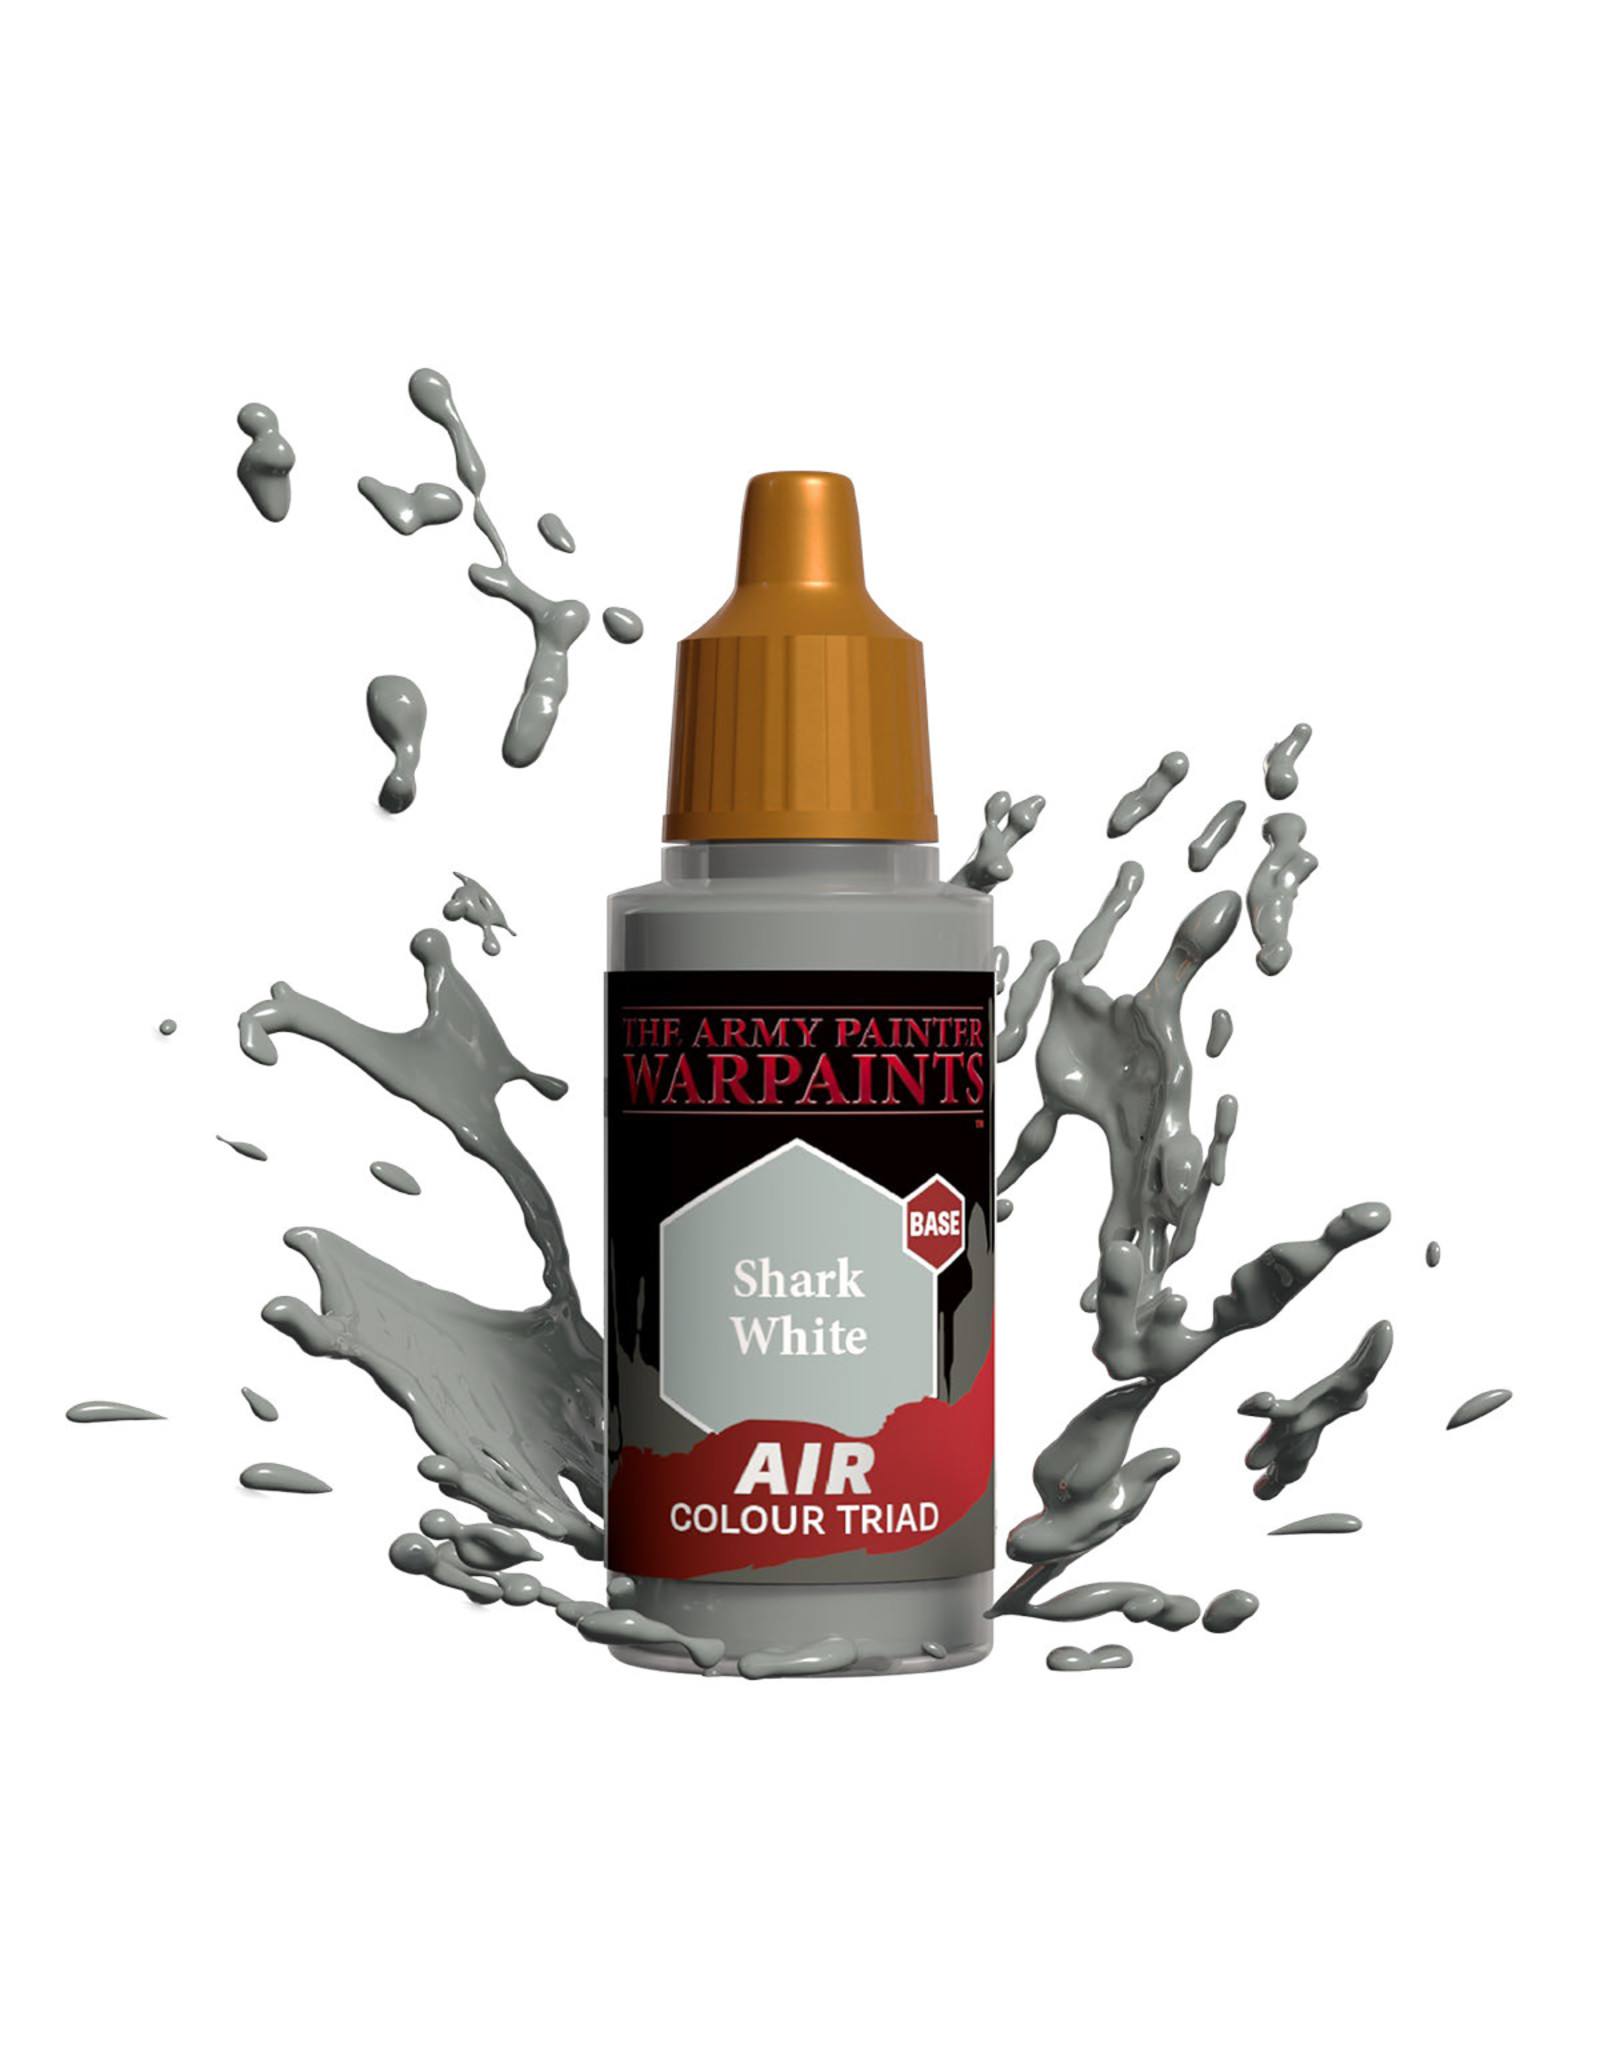 The Army Painter The Army Painter Warpaints Air: Shark White